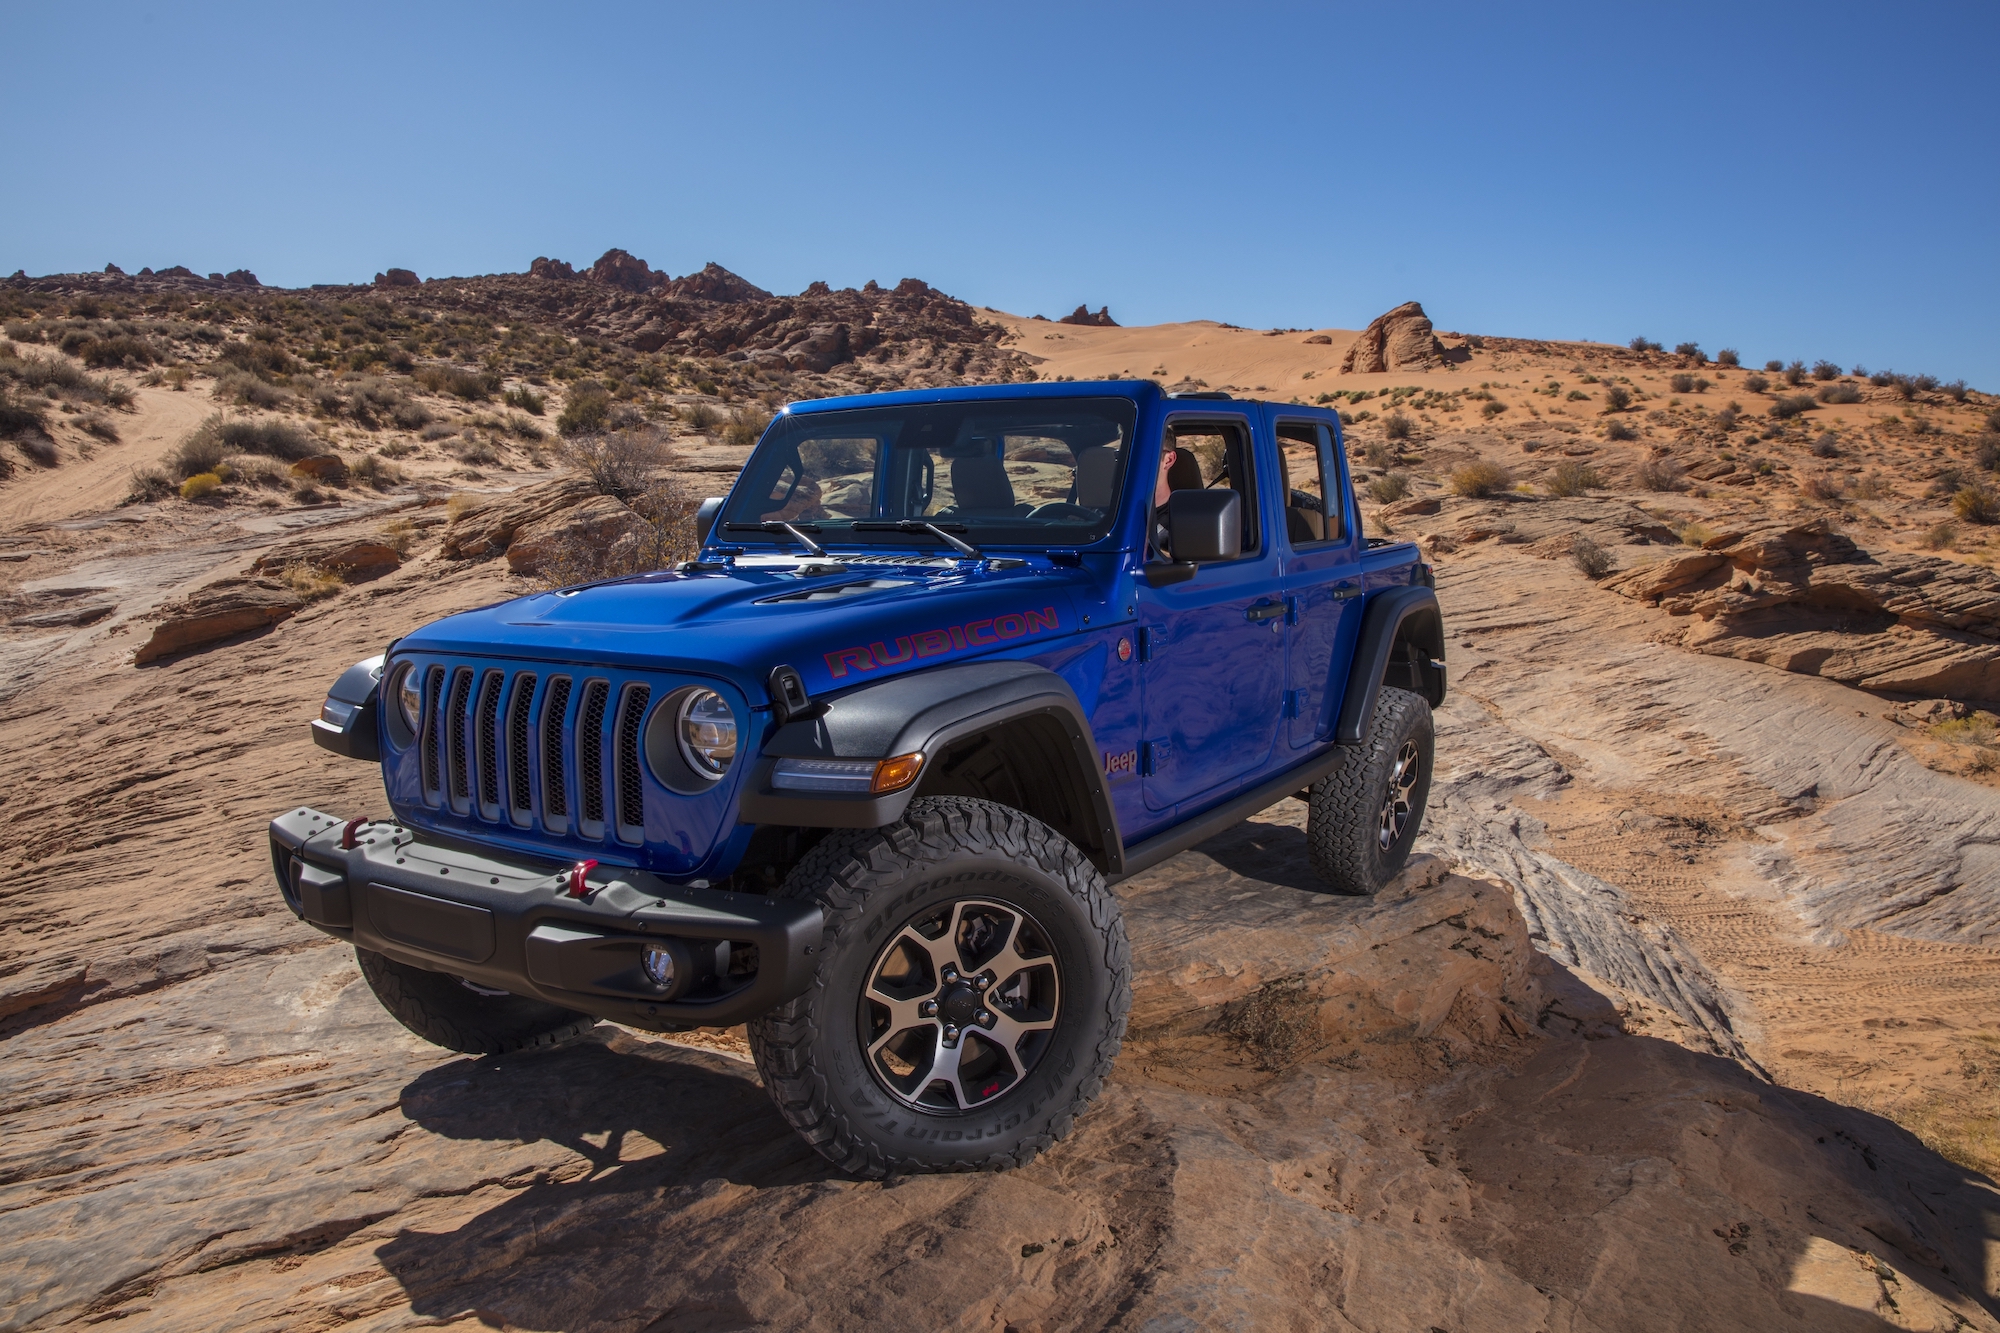 2020 Jeep Wrangler Rubicon EcoDiesel front three-quarter articulation off-road